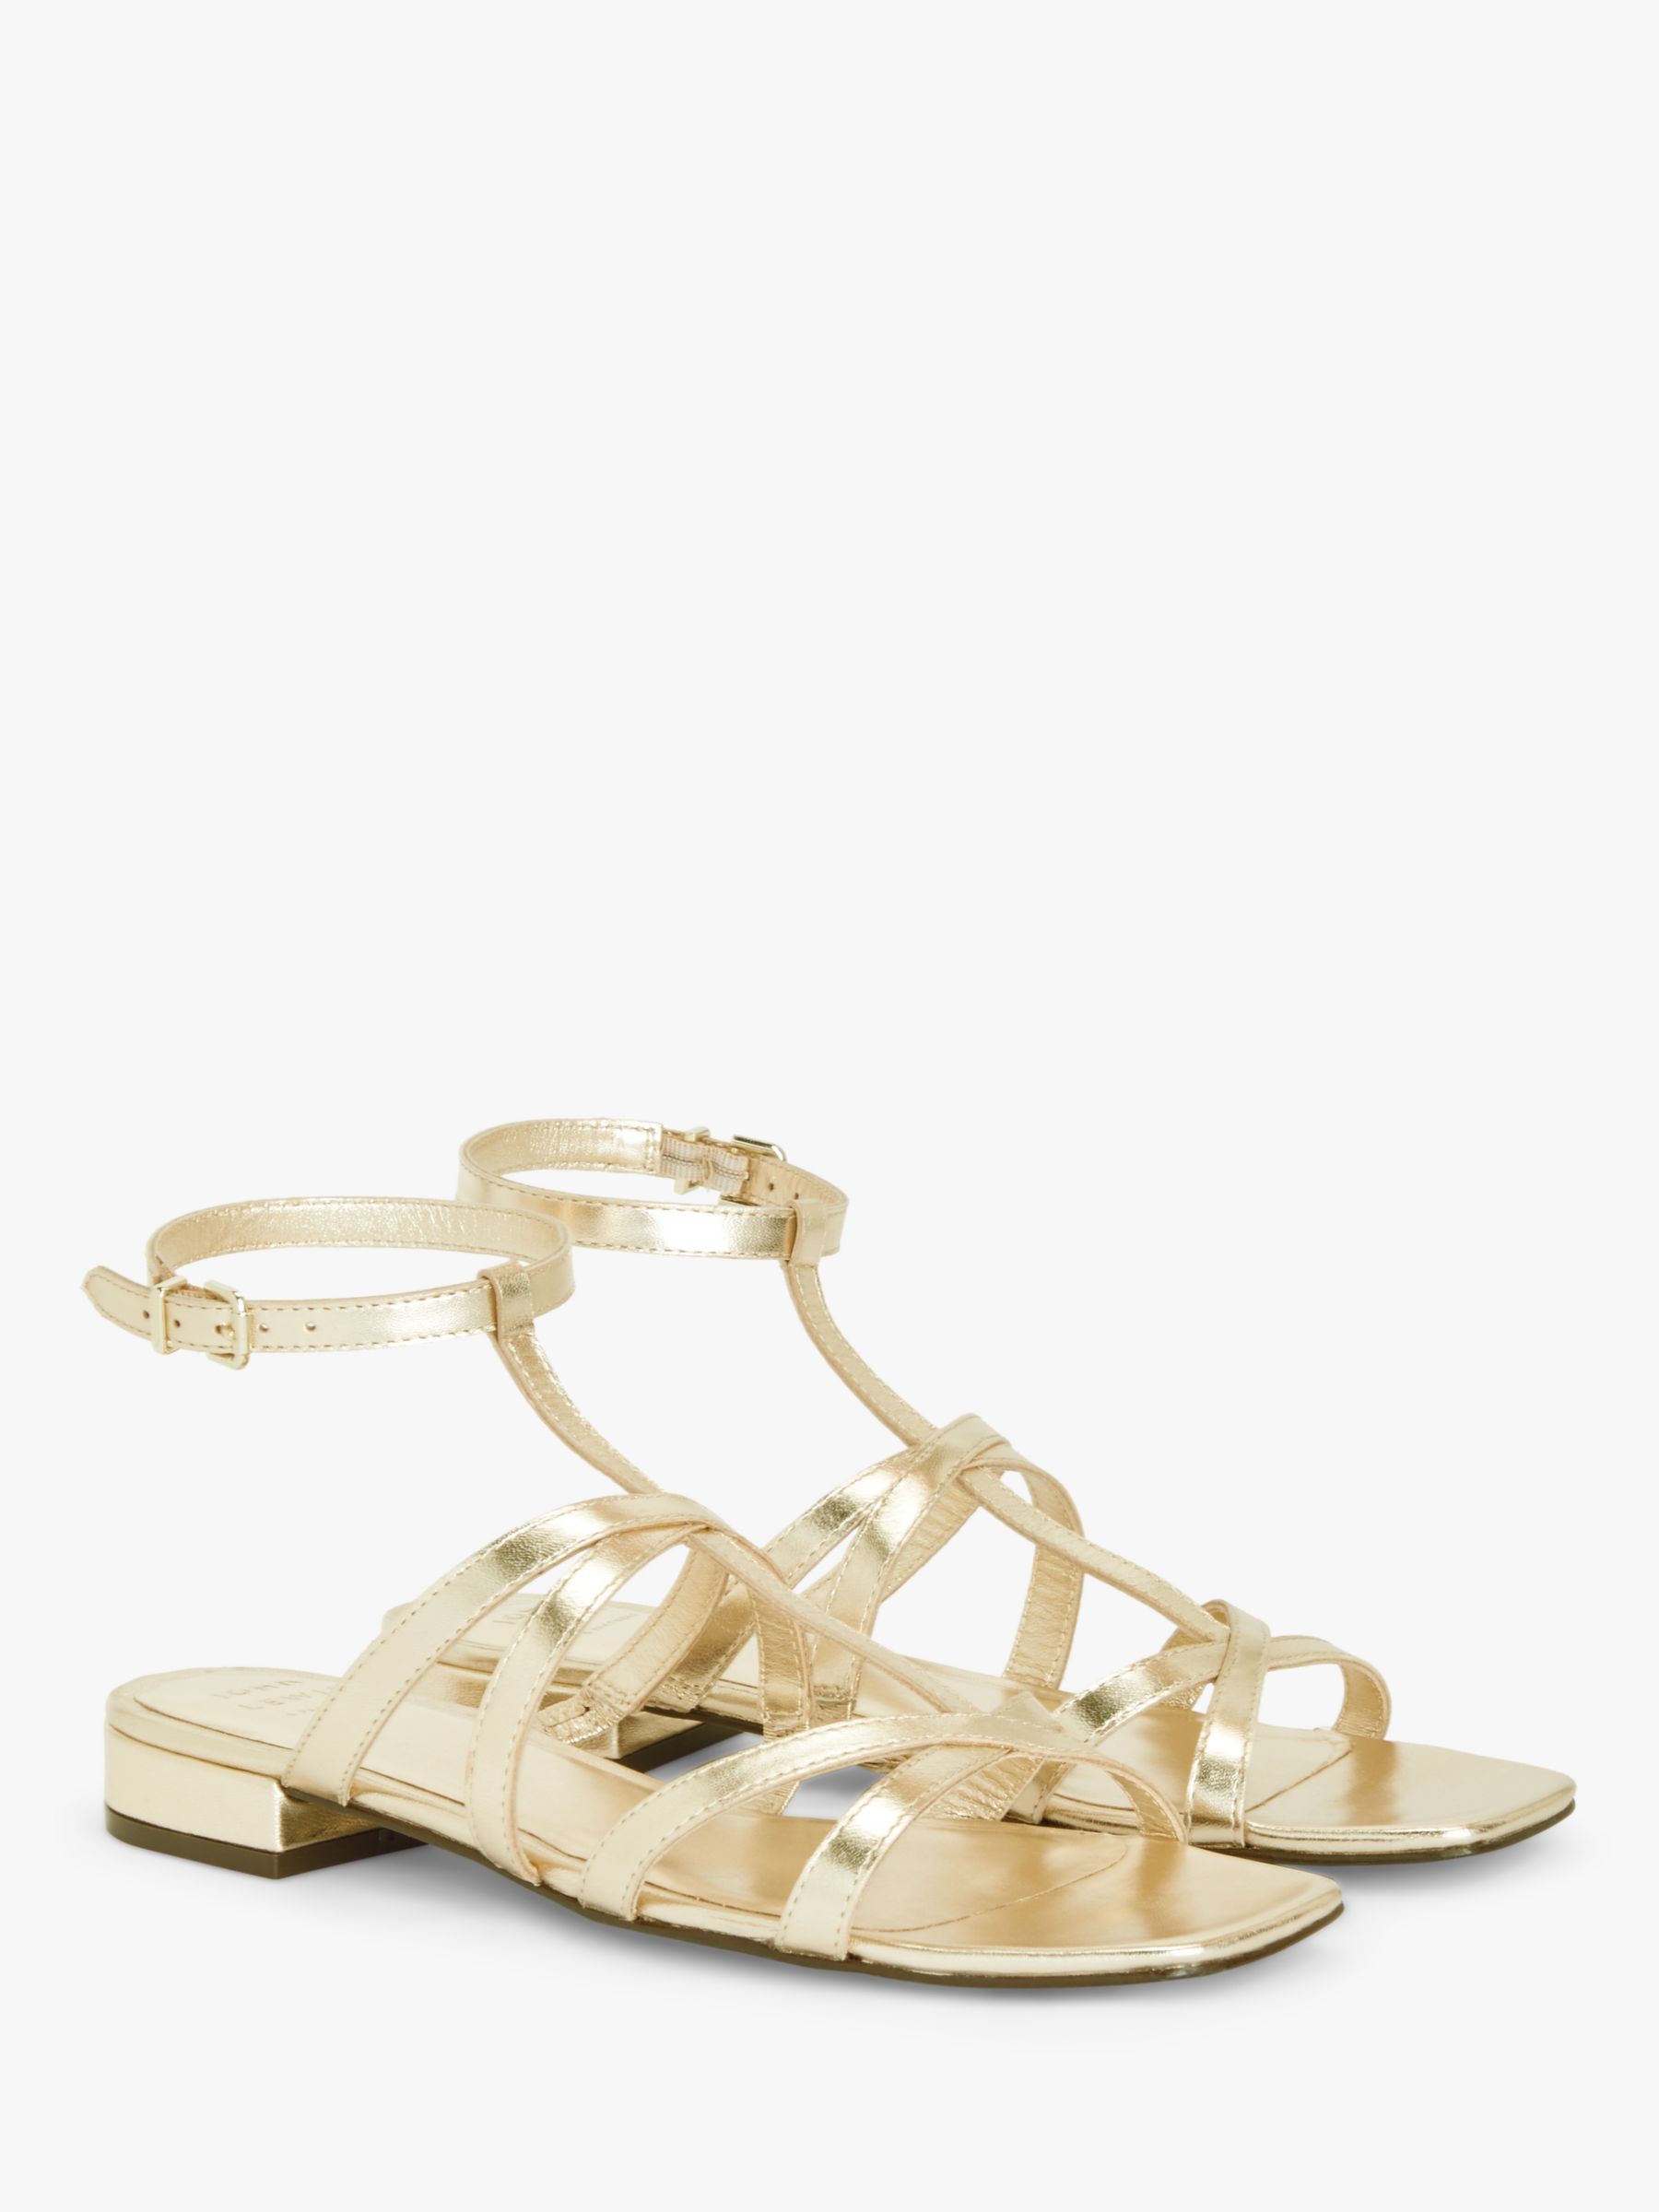 John Lewis Norway Leather Pop Gladiator Strappy Sandals